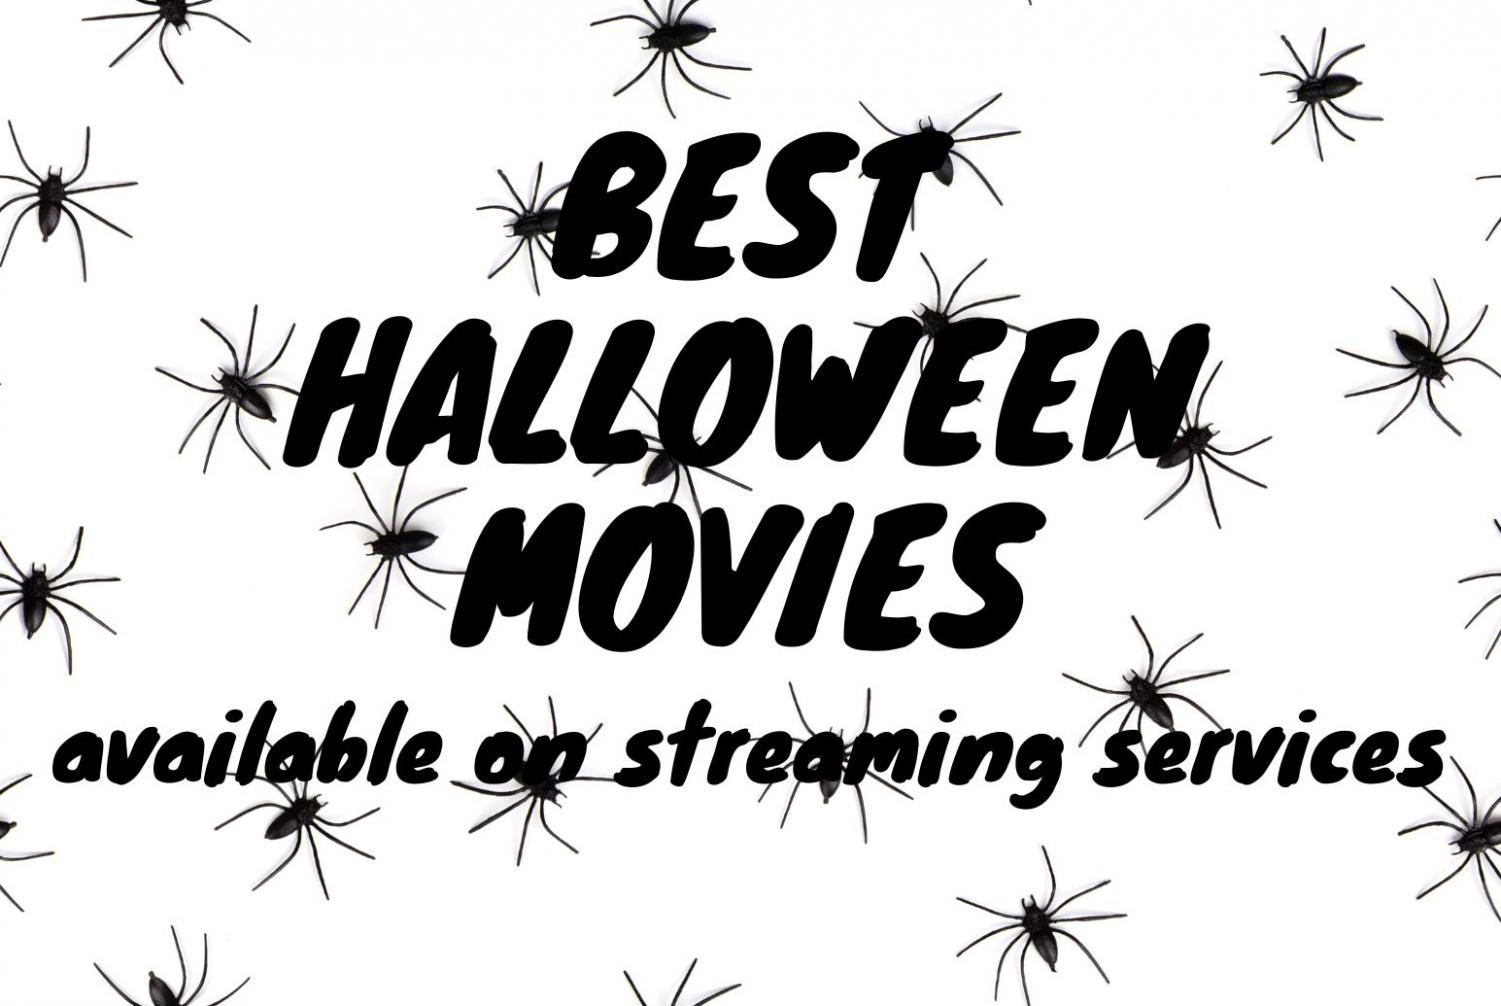 Best Halloween movies on streaming services The Mirror